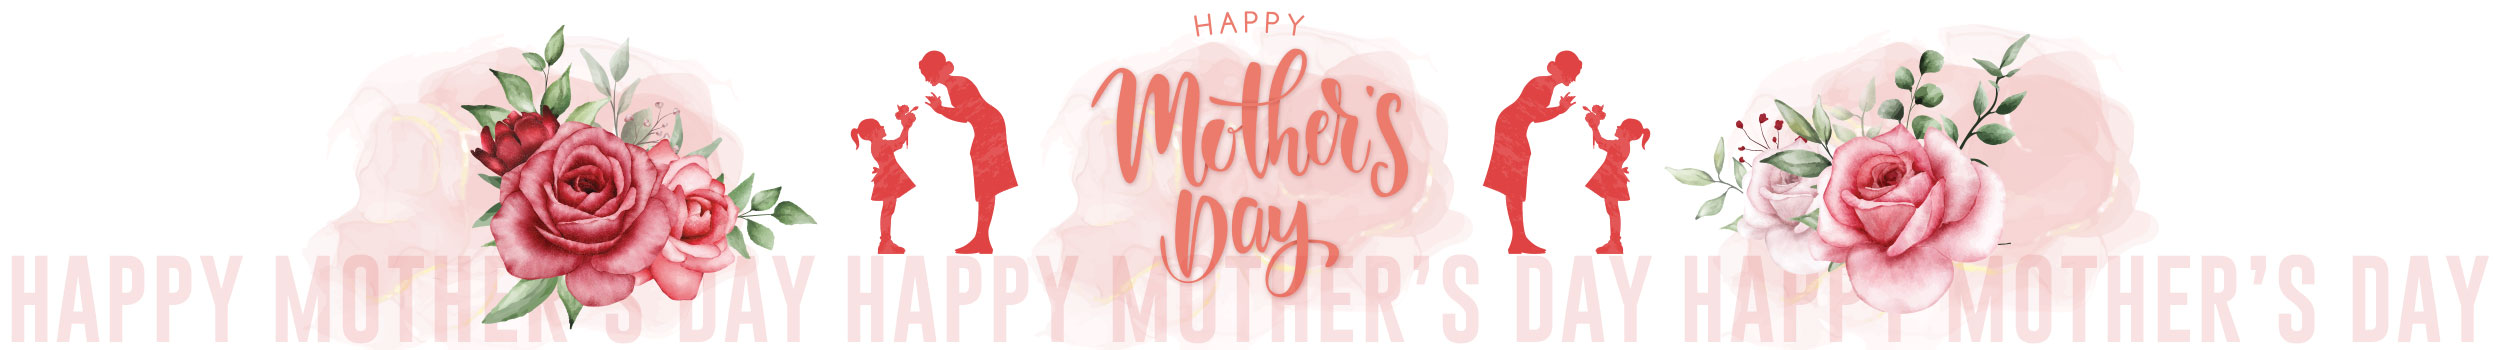 mothers day vietnam saigonflowers page footer